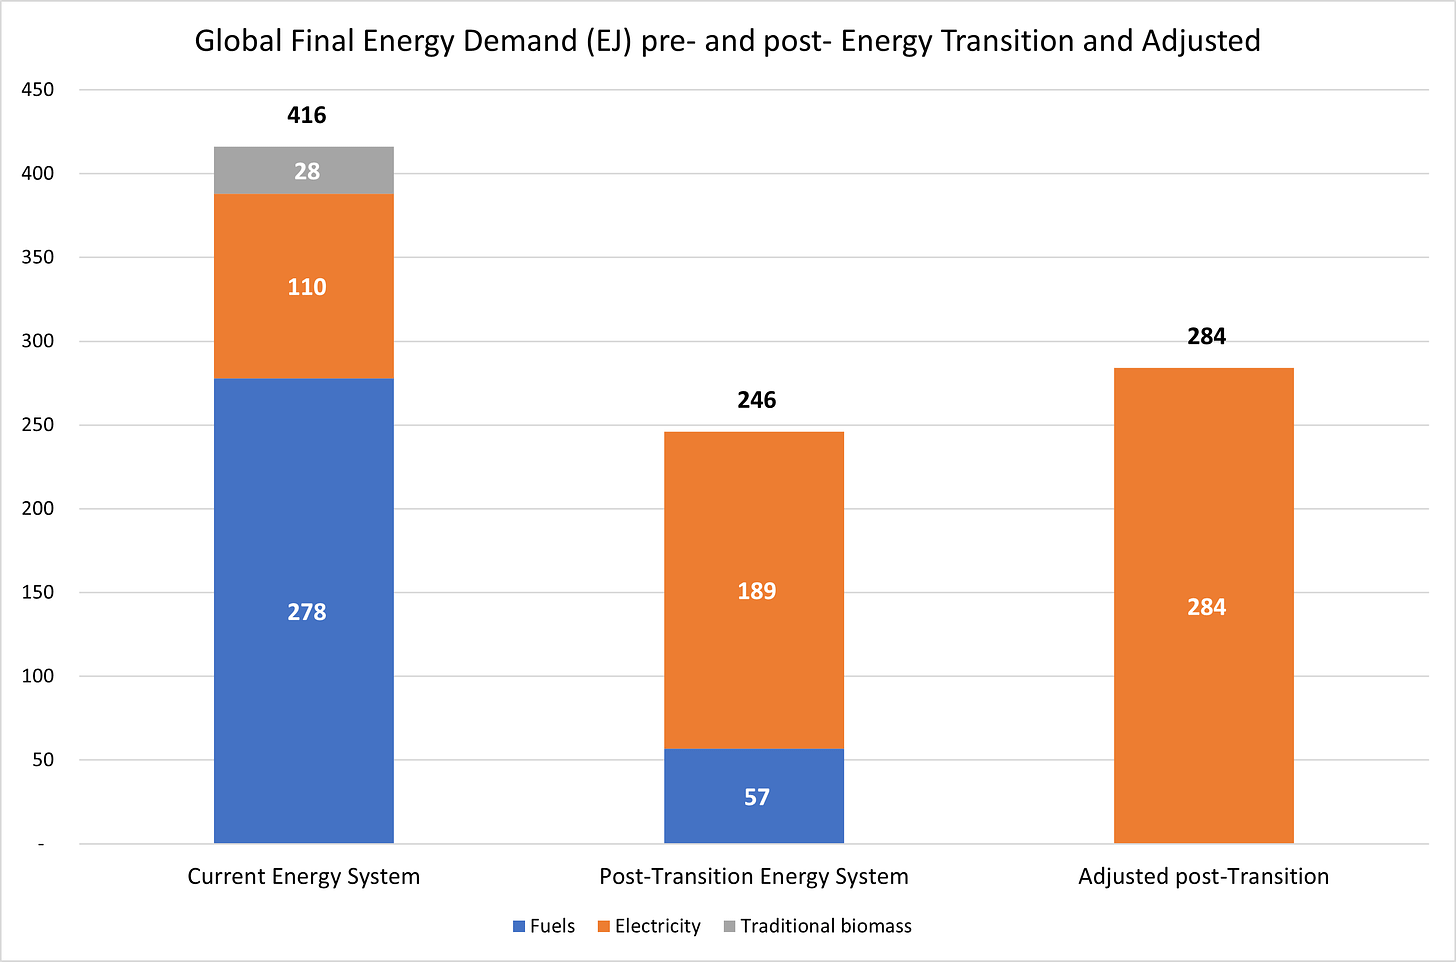 Figure 2 - Adjusted Change in Final Energy Demand through the energy transition